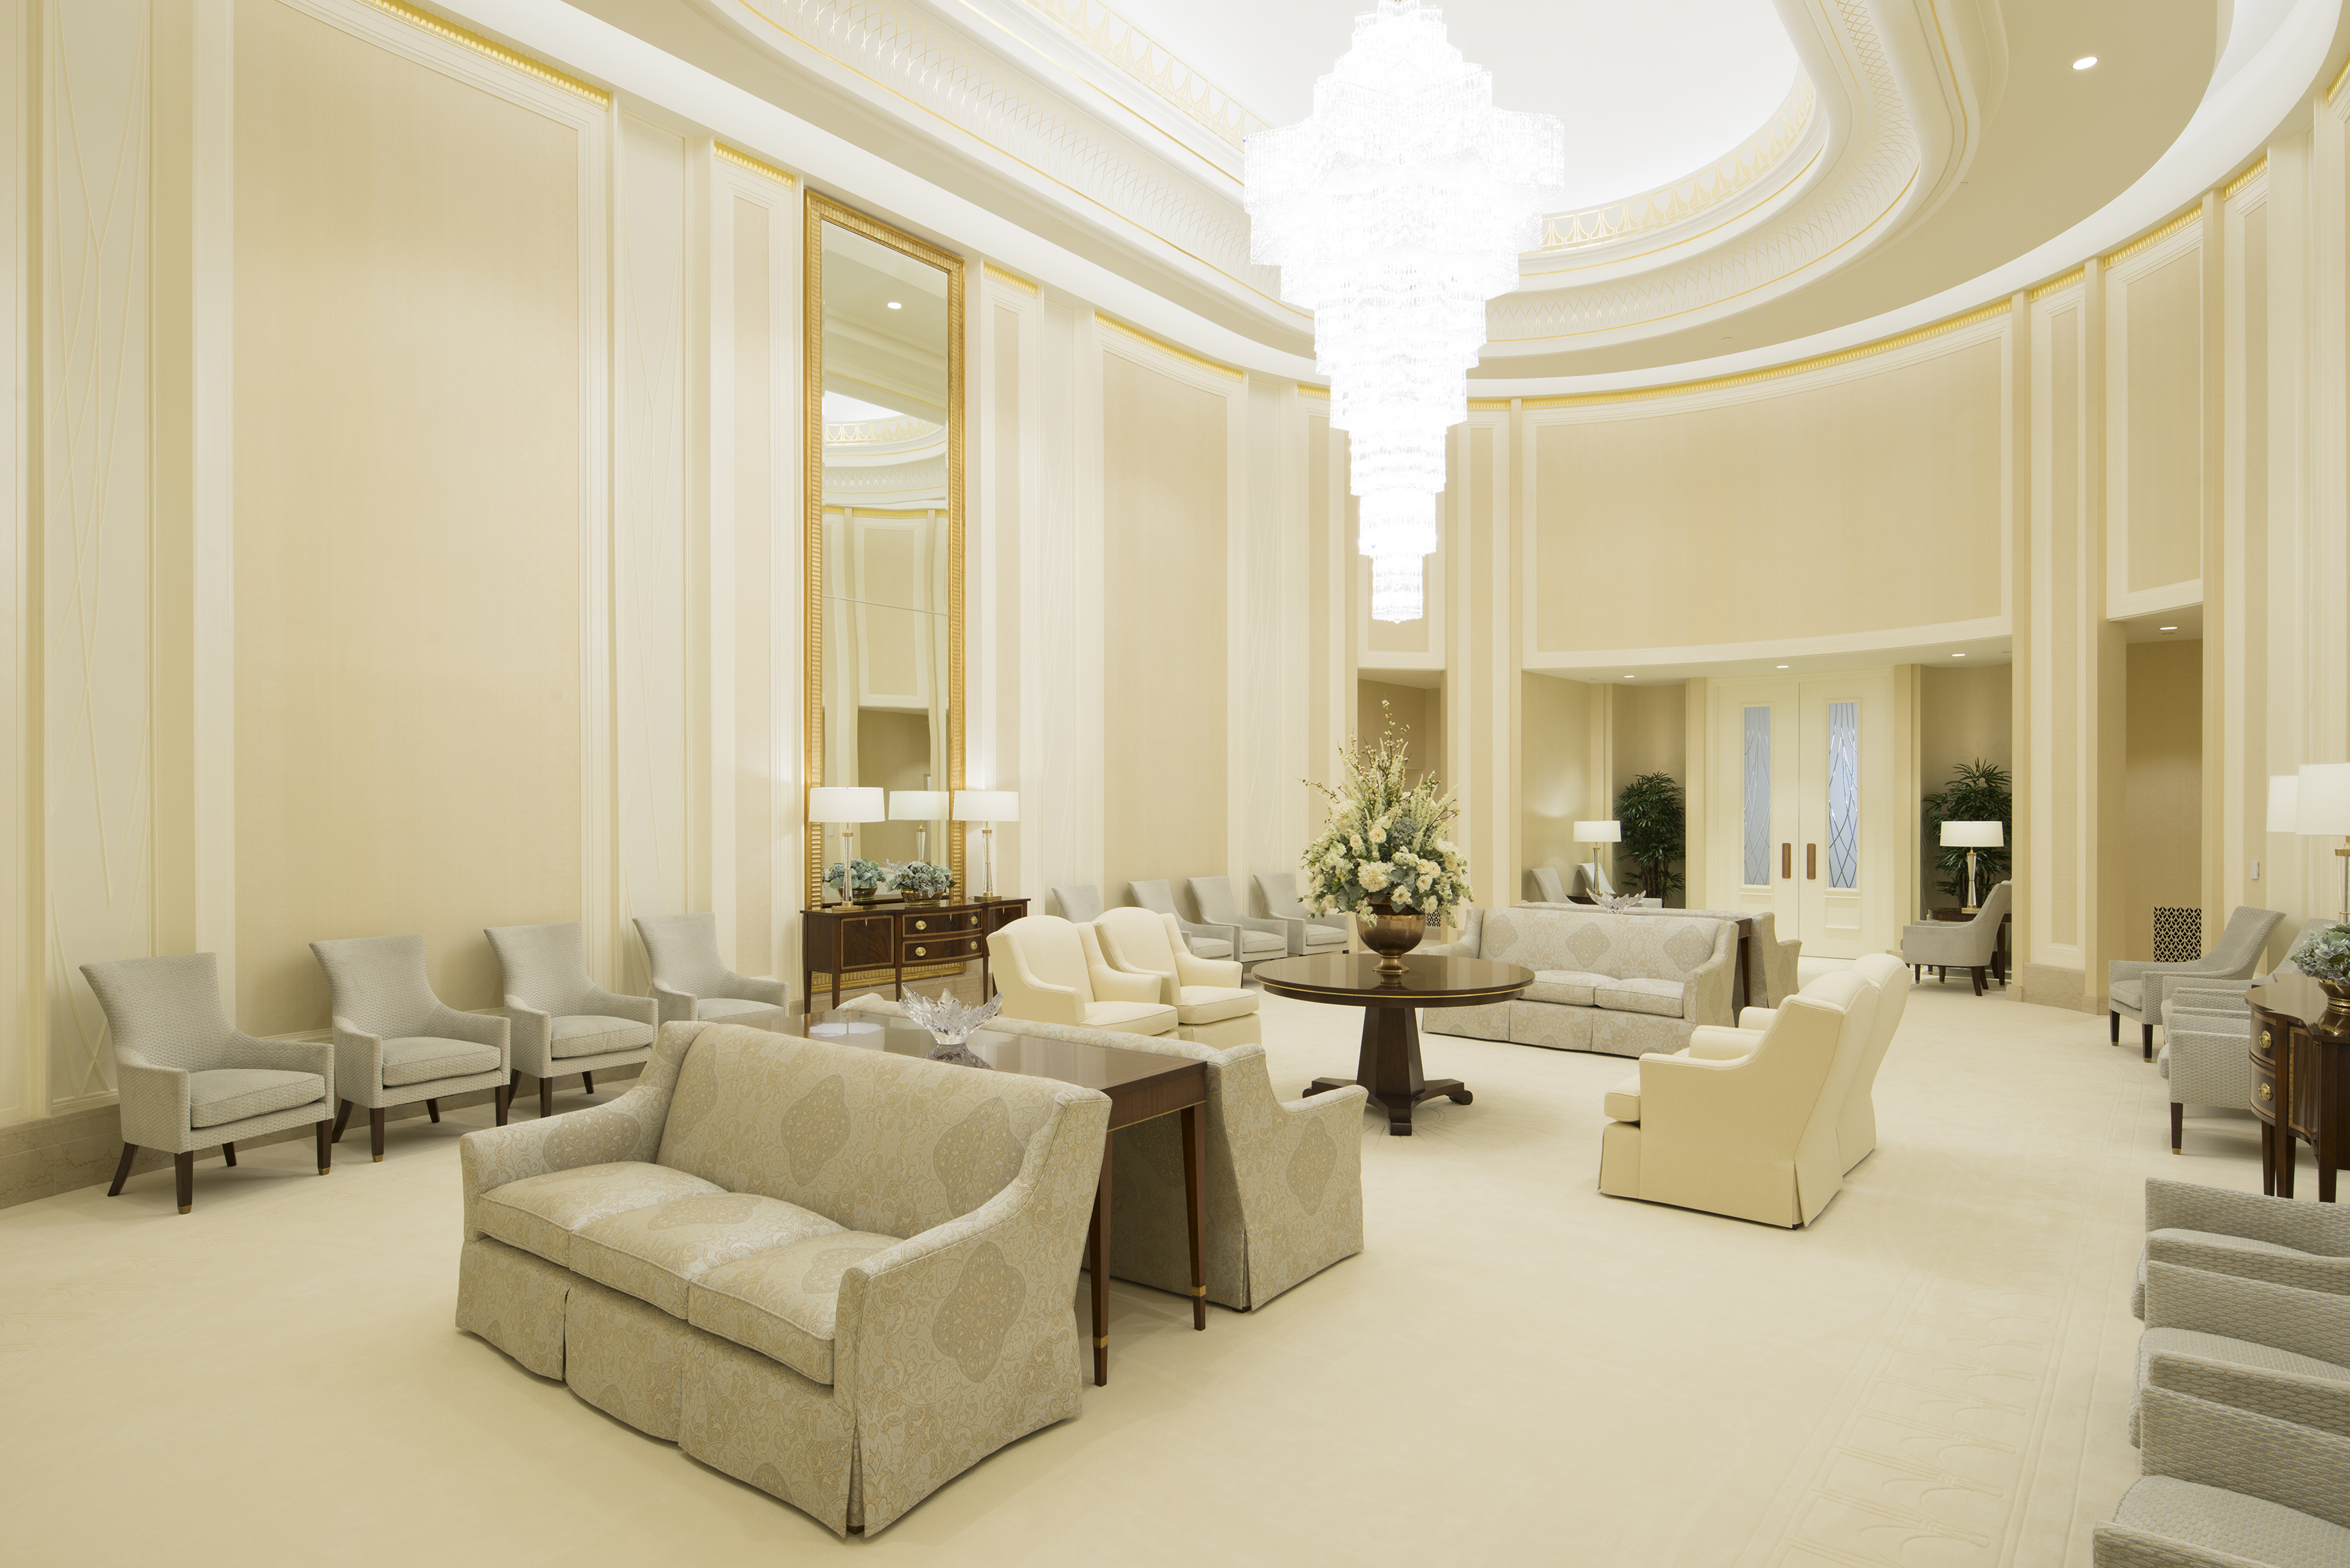 A white room with white and gray furniture around, with a large, clear-glass chandelier hanging from the middle of the ceiling.